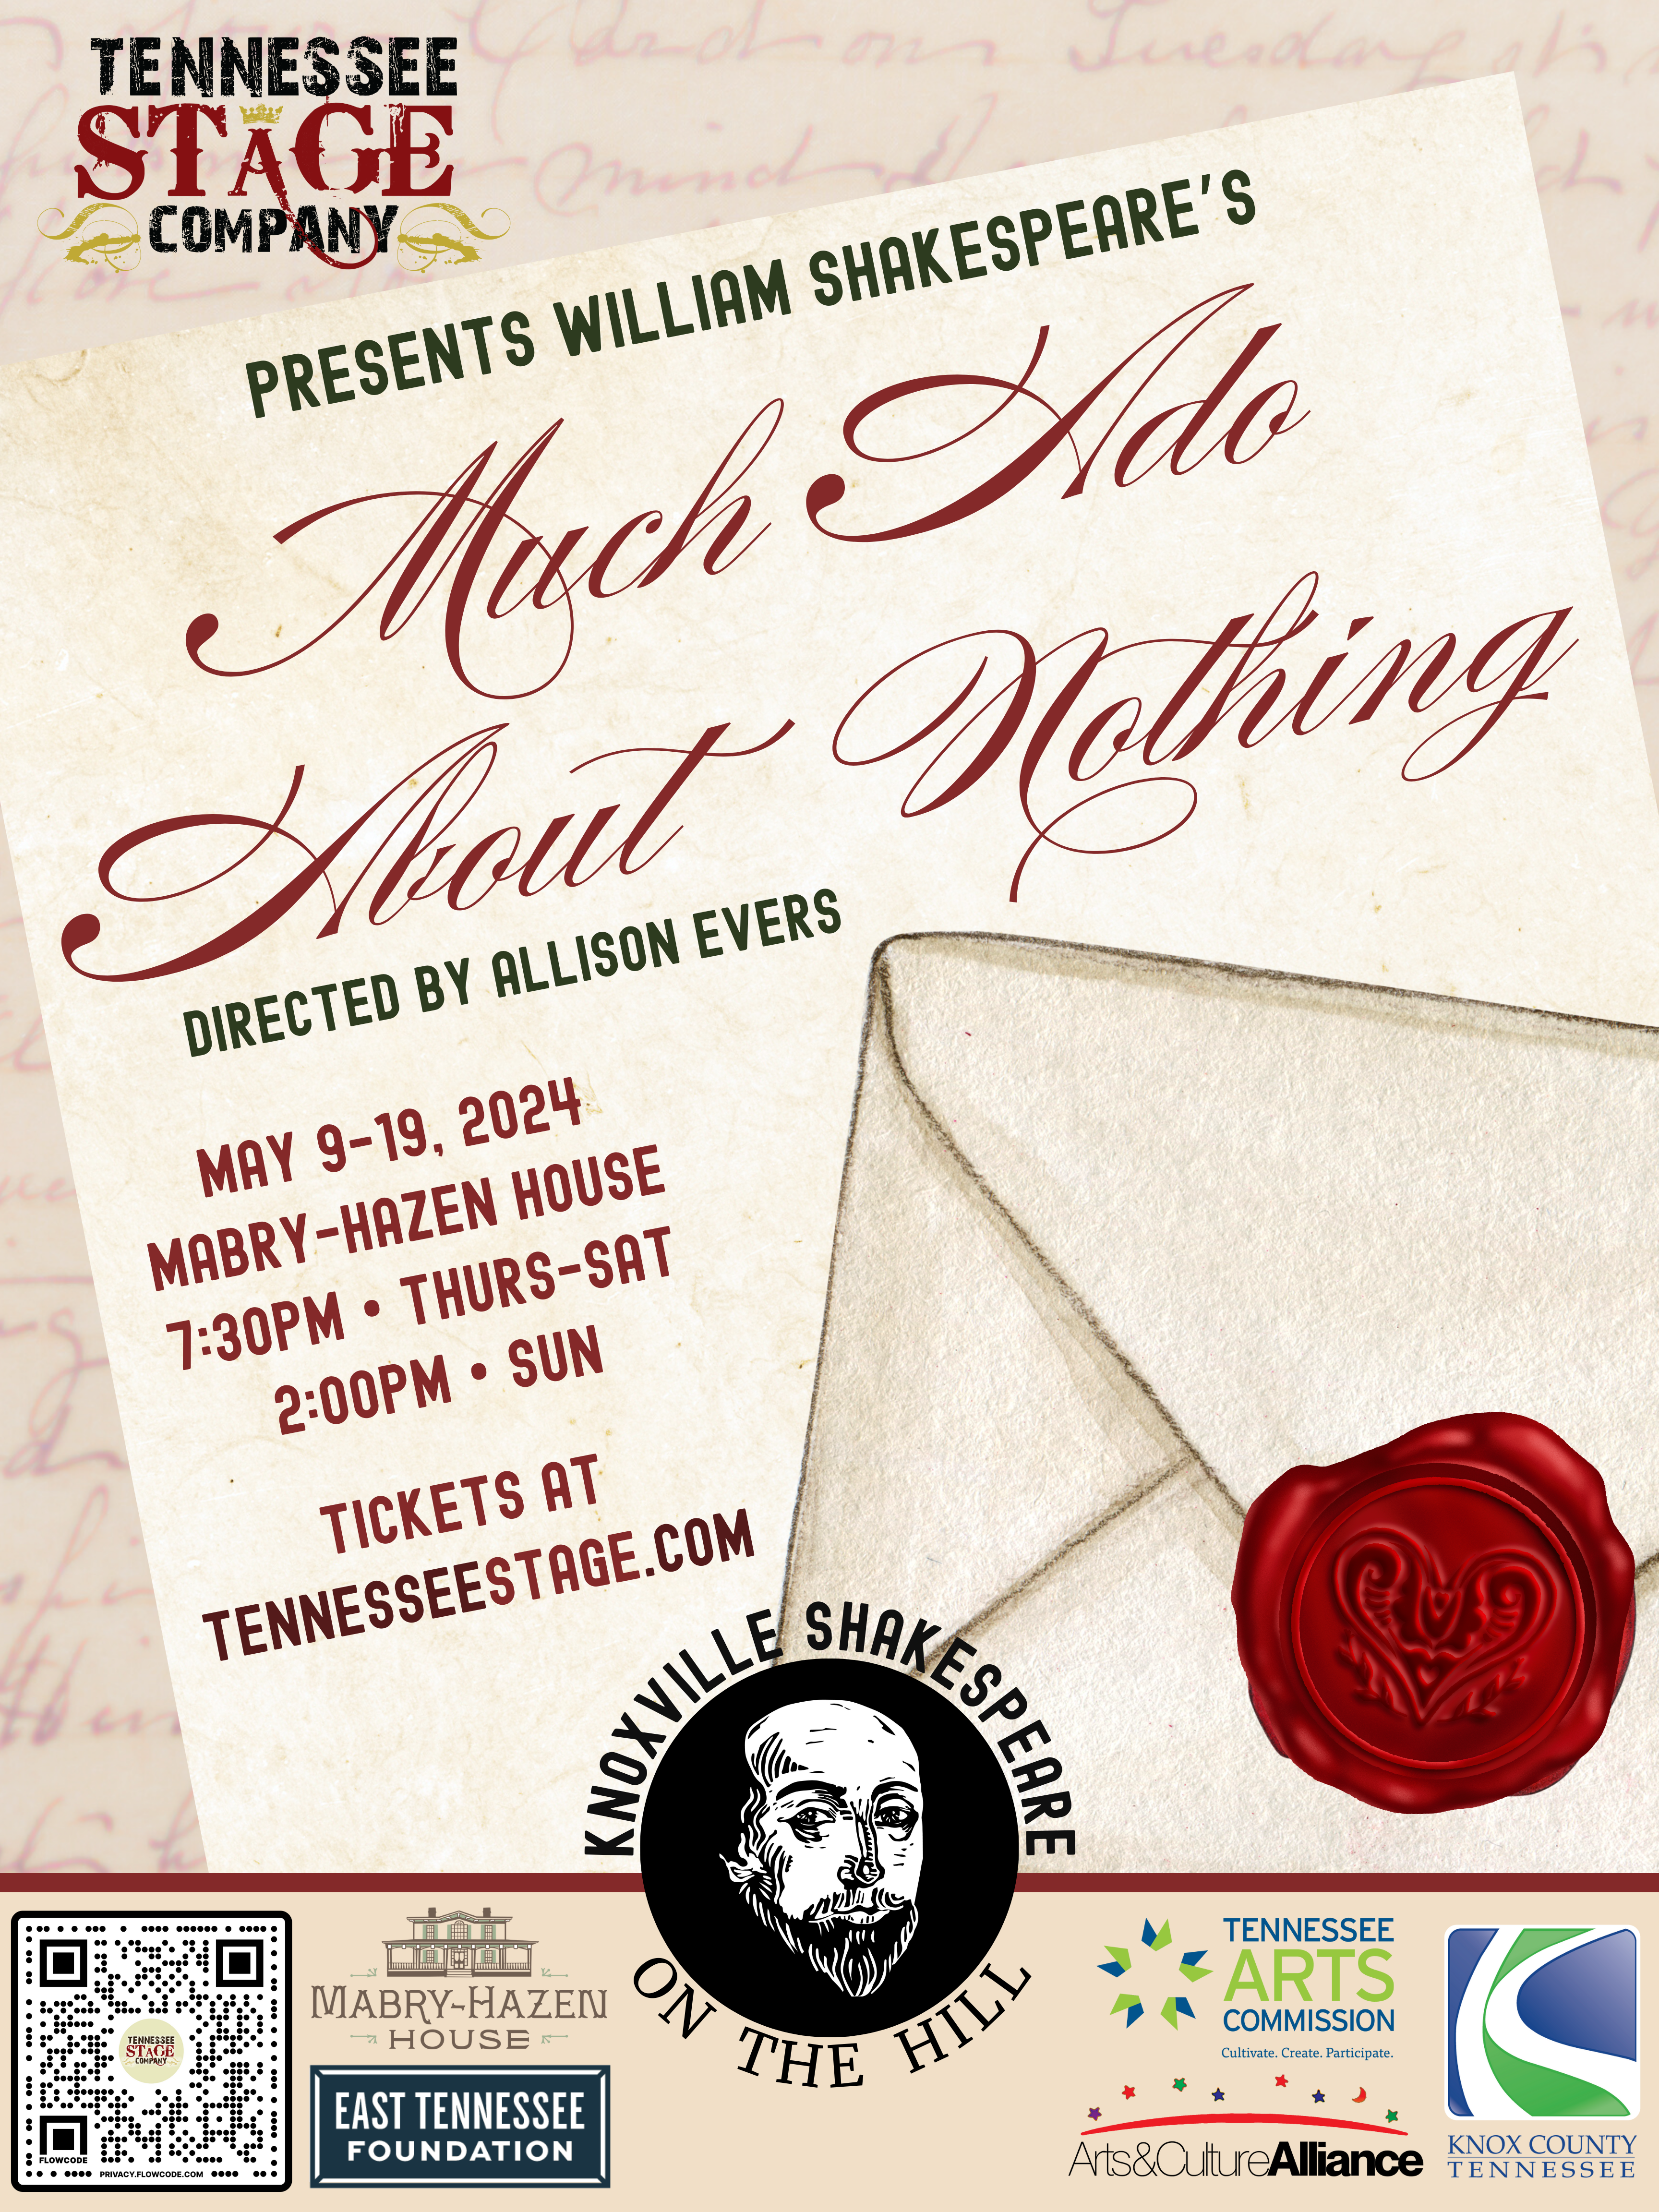 Tennessee Stage Company Presents Much Ado About Nothing by William Shakespeare. May 9th thru the 19th. Thursday thru Saturday night performances beginning at 7:30 pm. Sunday Matinee performances at 2 pm. Tickets available at TennesseeStage.Com